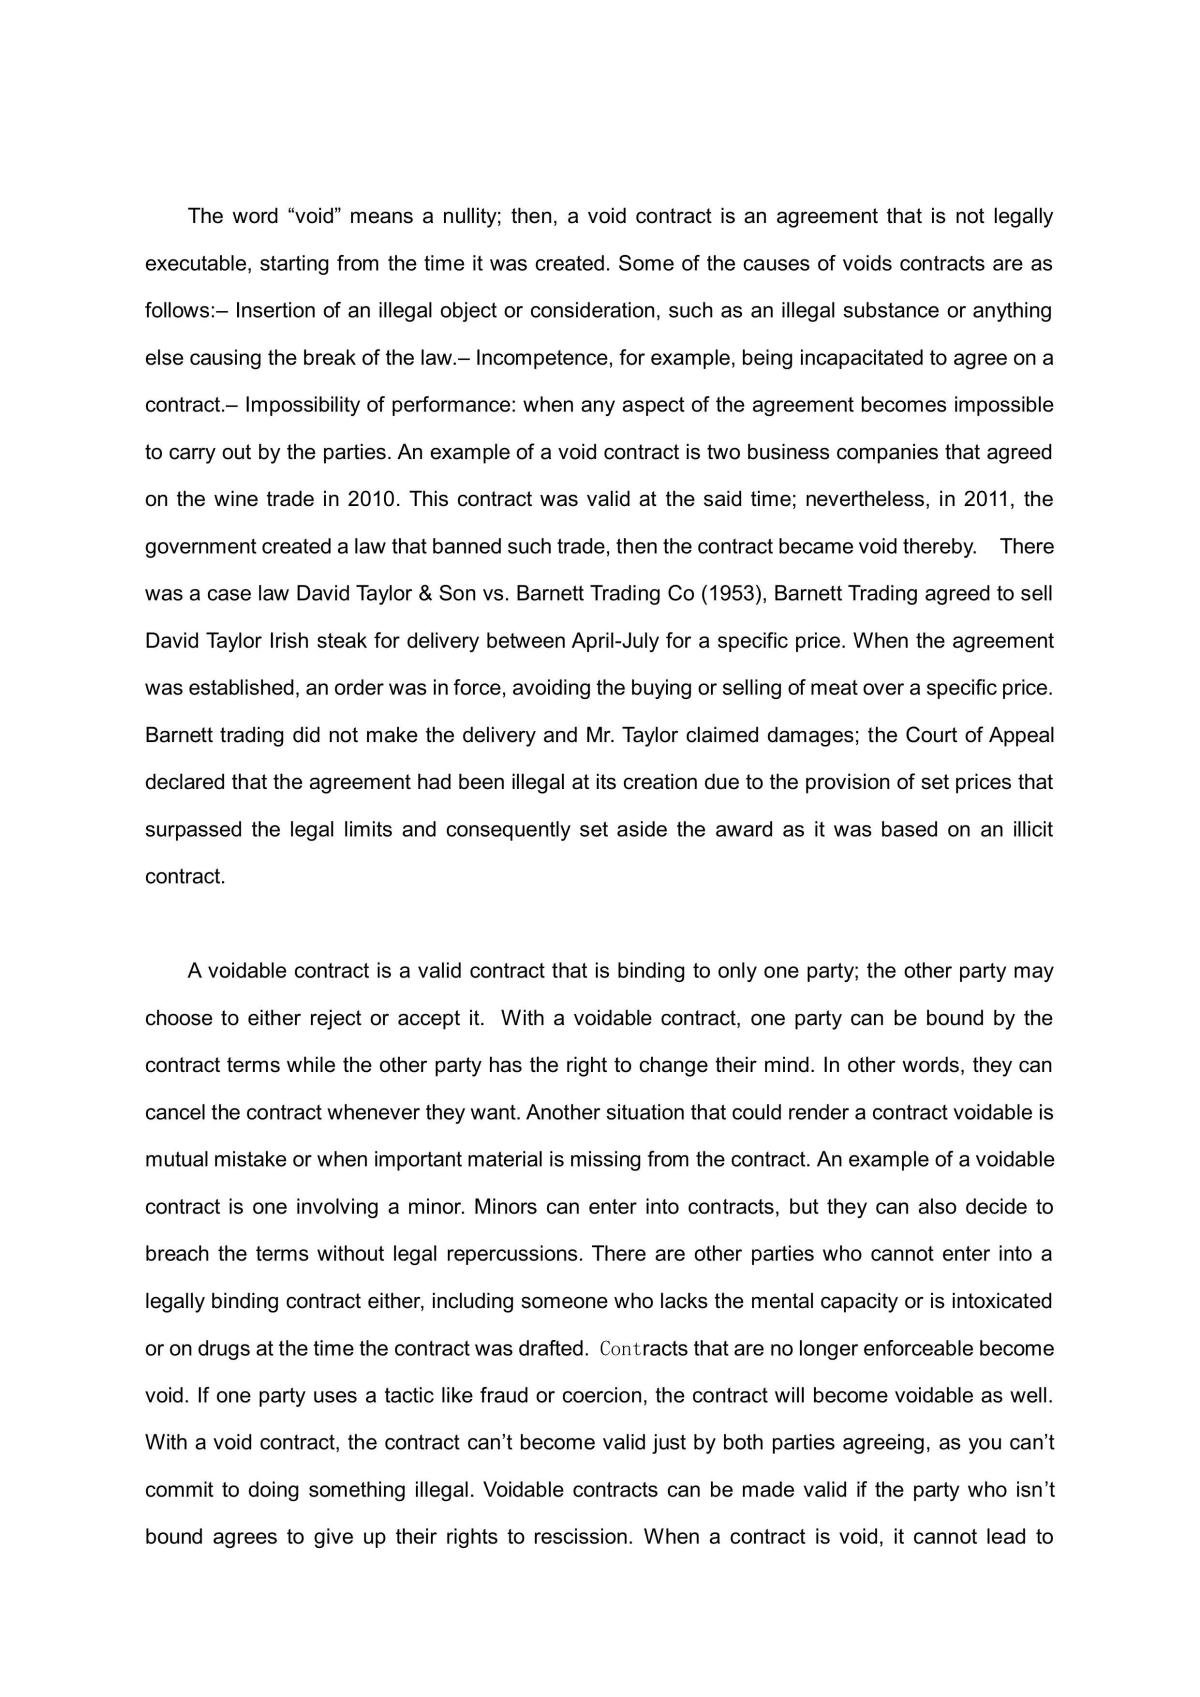 Essay comparing void and voidable contracts - Page 3